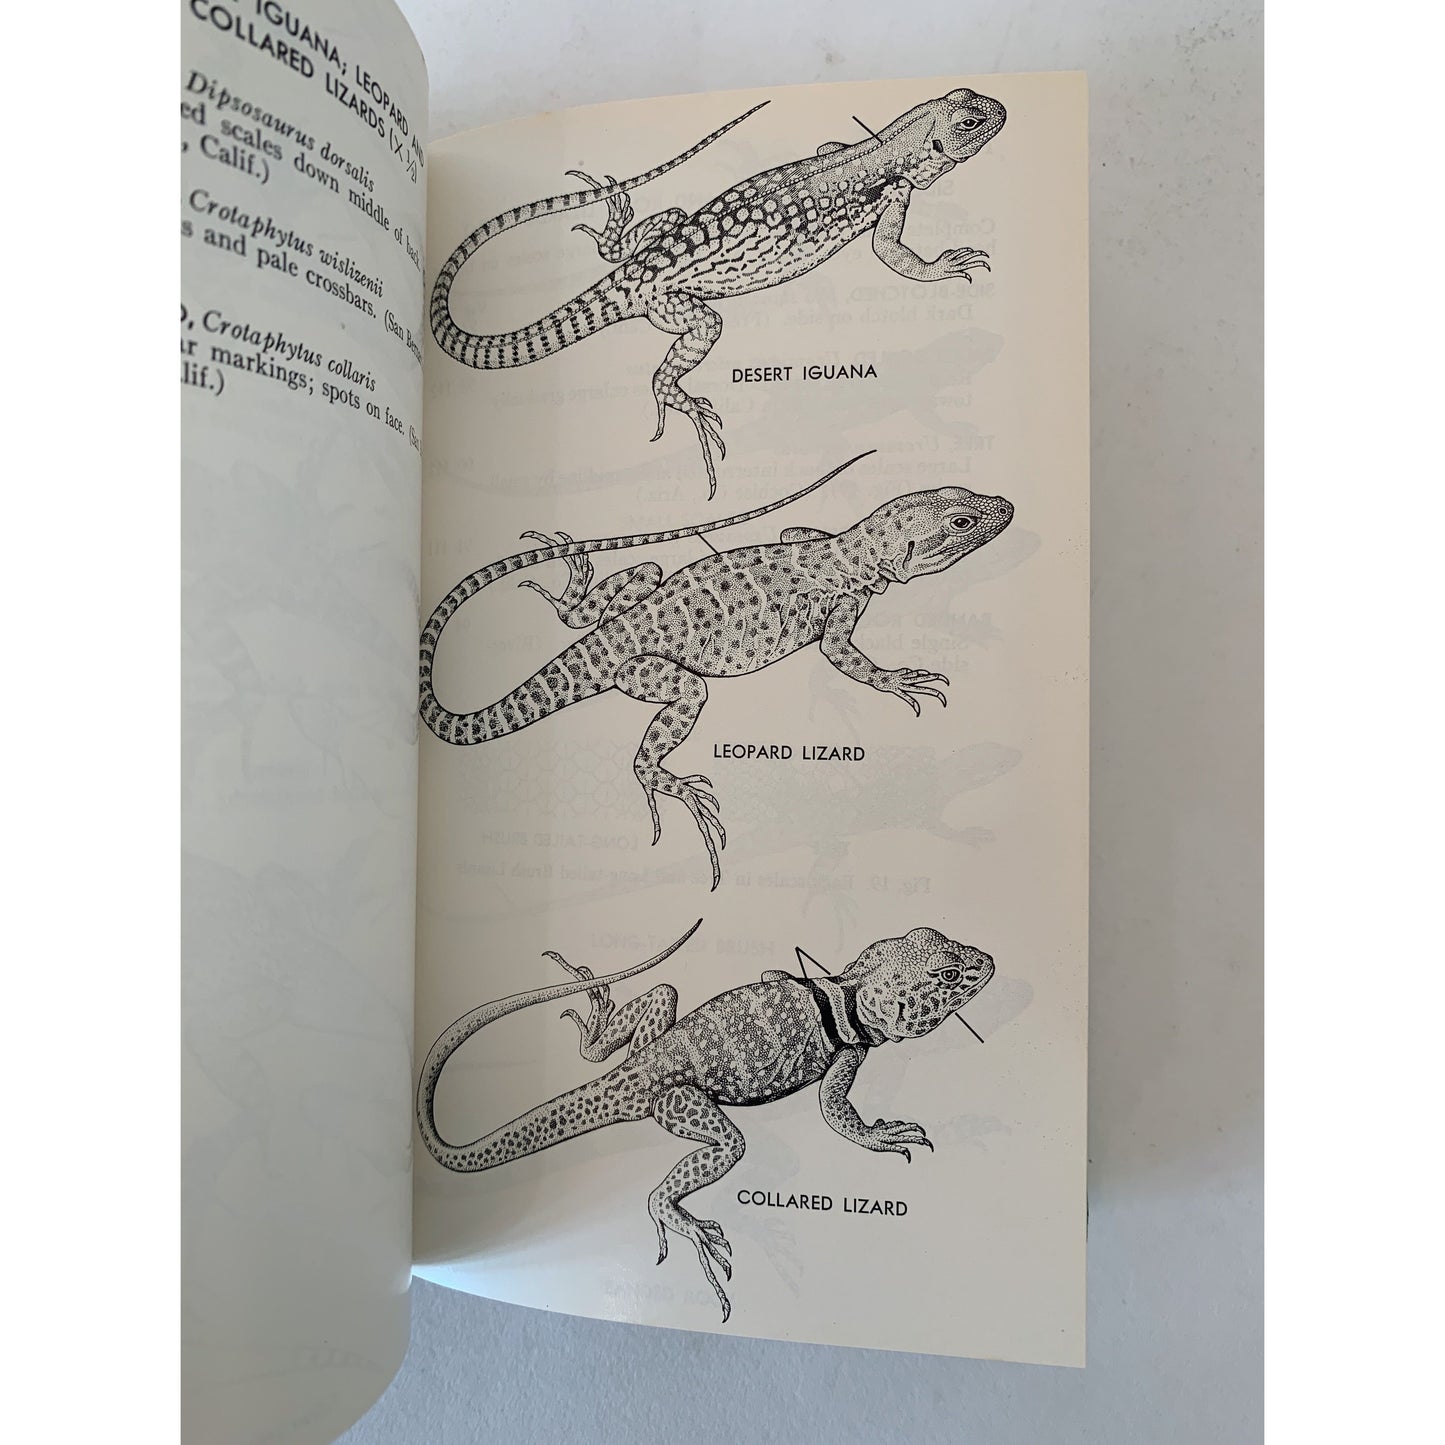 A Field Guide to Western Reptiles and Amphibians, 1966, Roger Tory Peterson, Hardcover